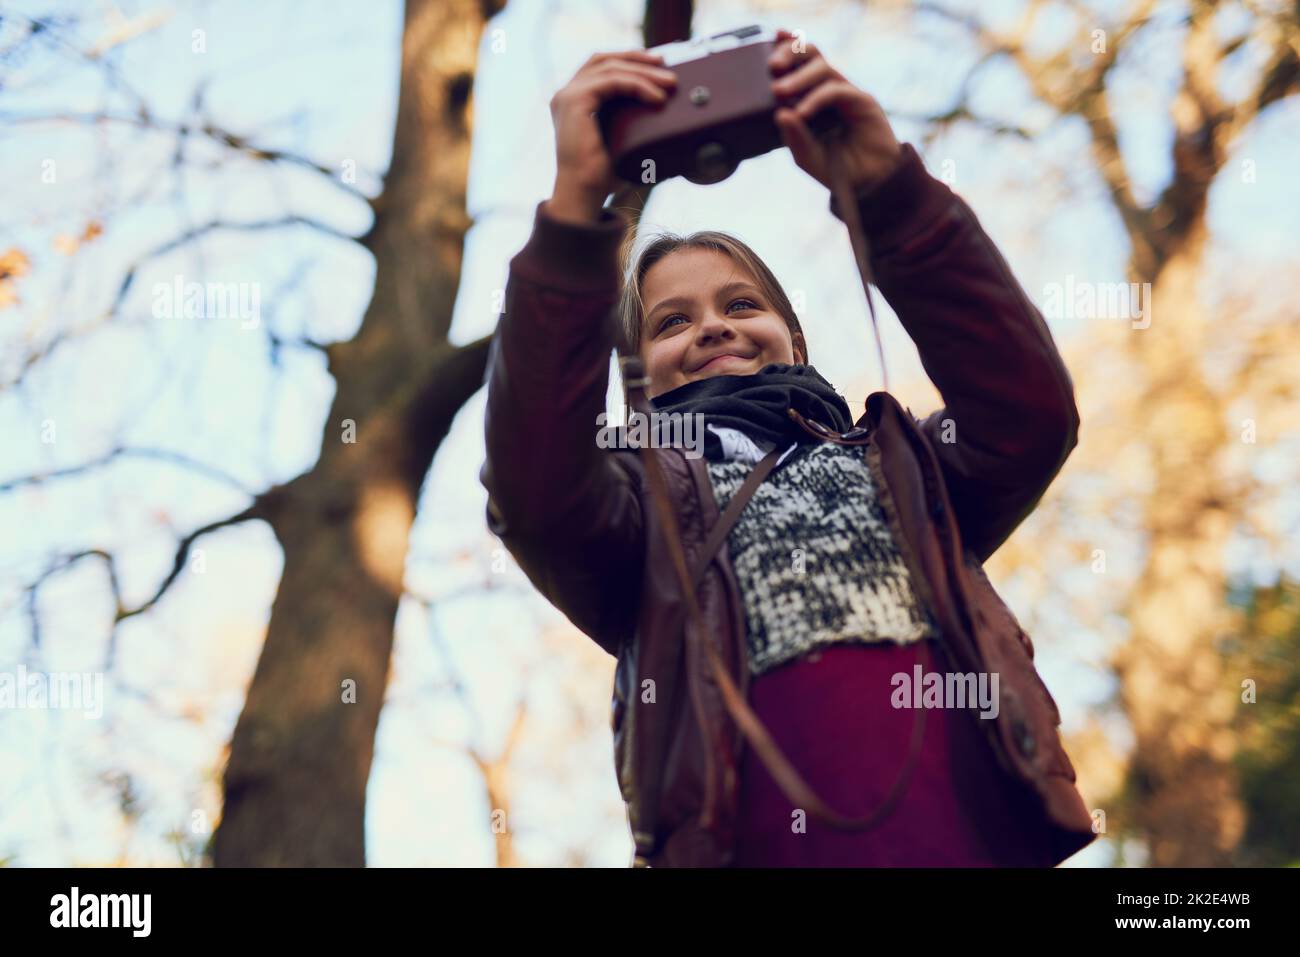 Out on an exploration. Shot of a young girl taking a selfie with a vintage camera outdoors. Stock Photo